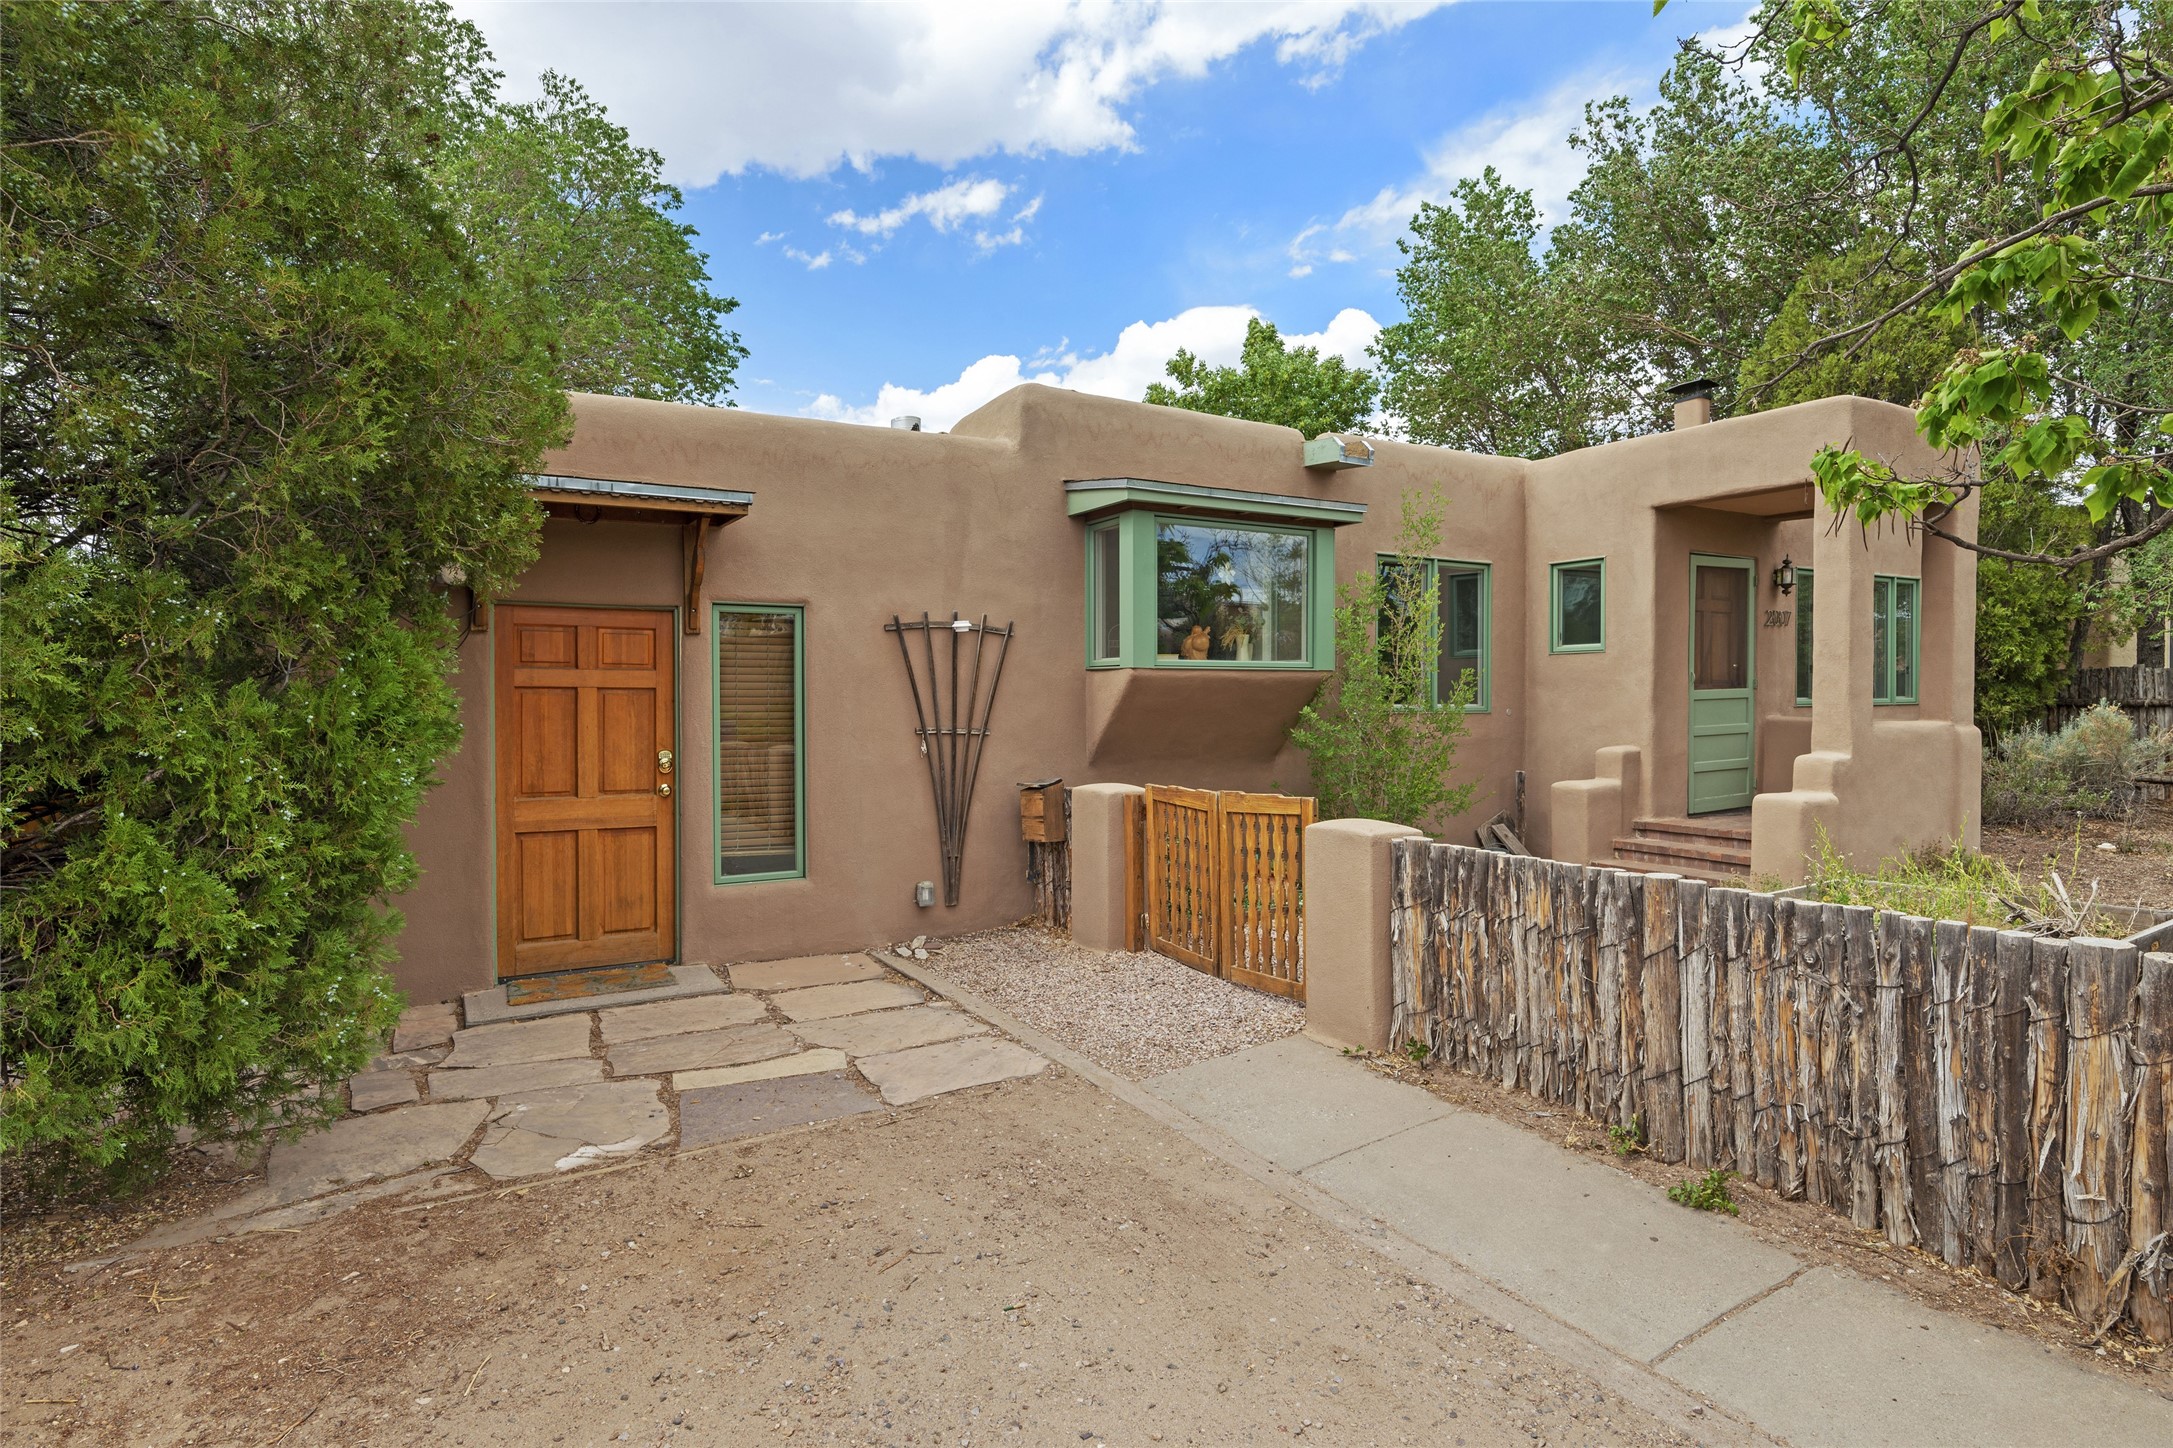 2007 Hopi, Santa Fe, New Mexico 87505, 4 Bedrooms Bedrooms, ,1 BathroomBathrooms,Residential,For Sale,2007 Hopi,202231522